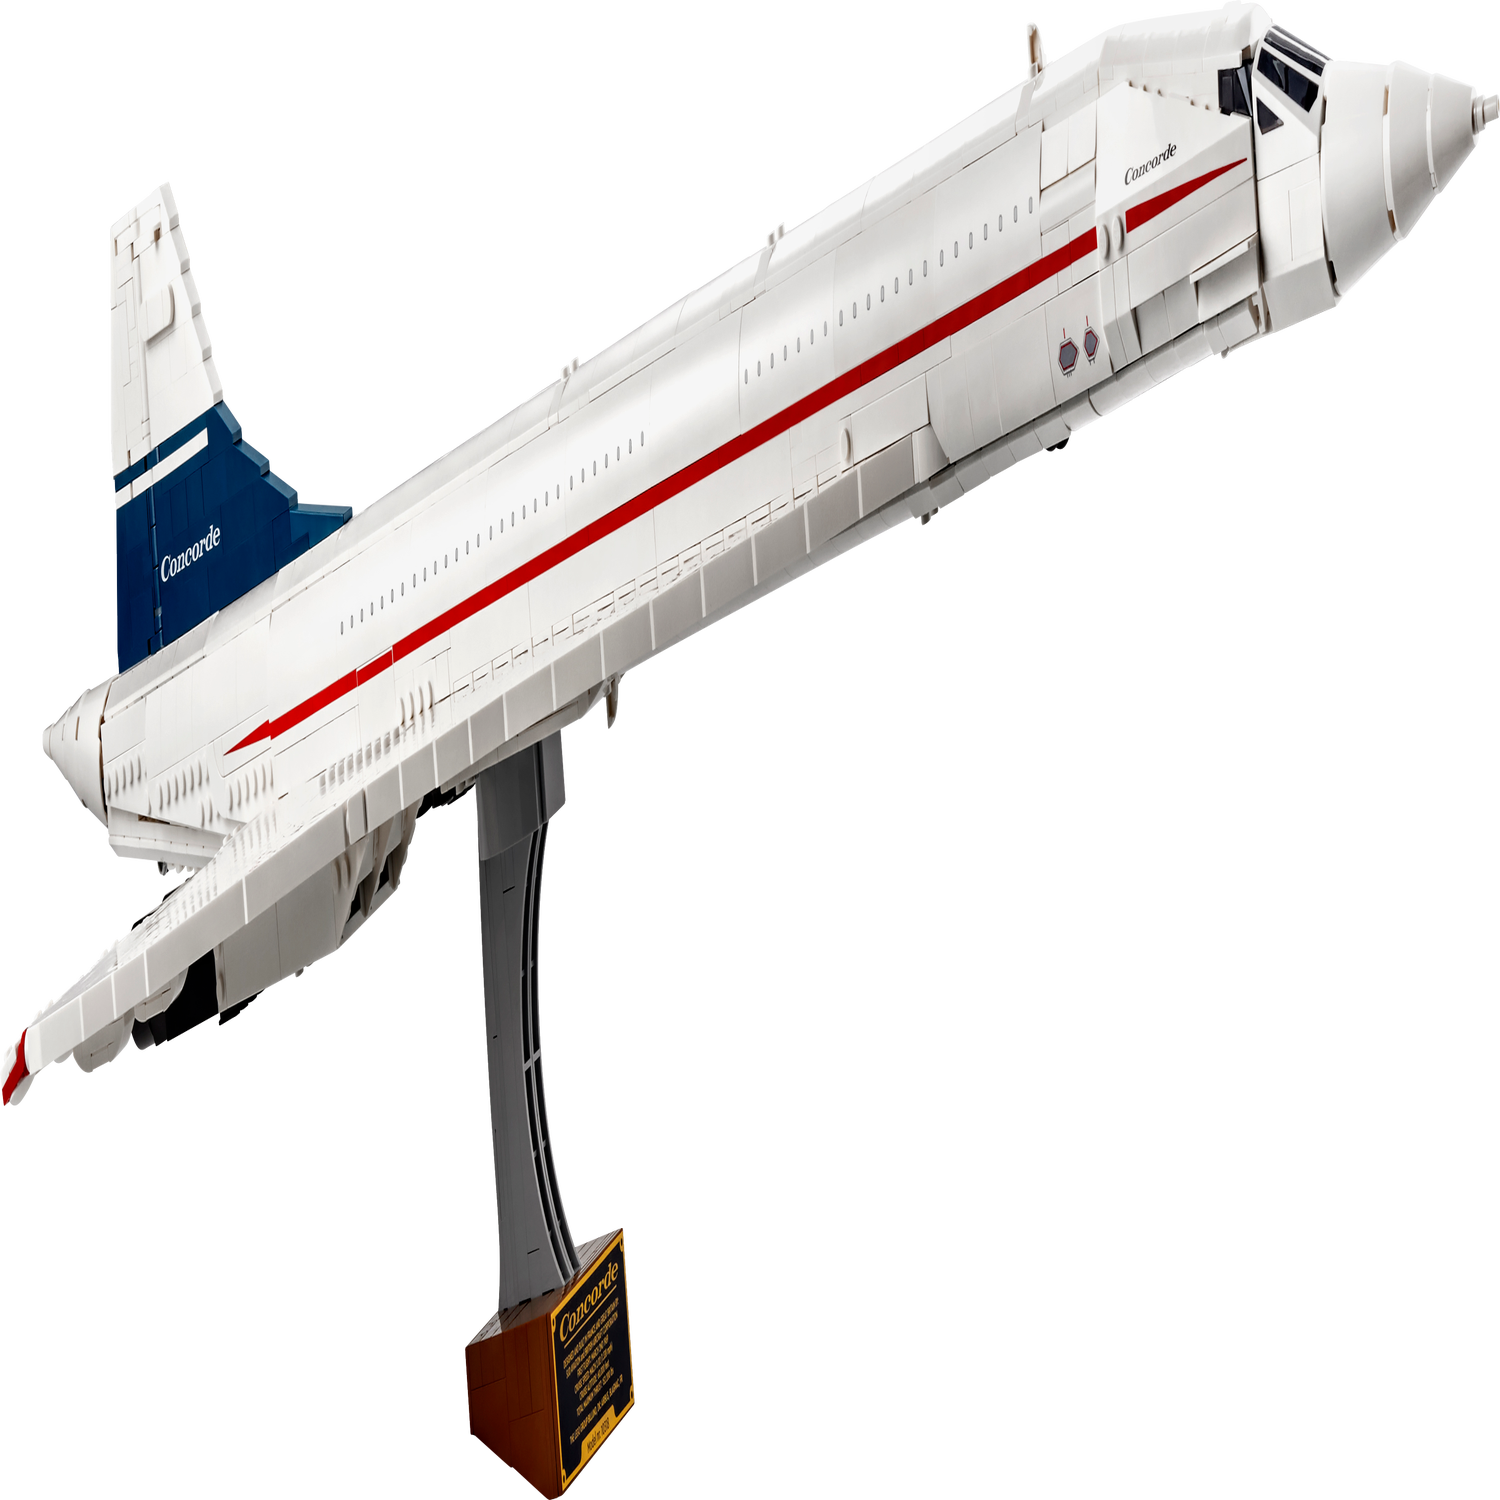 Space Shuttle 31134 | Creator 3-in-1 | Buy online at the Official LEGO®  Shop US